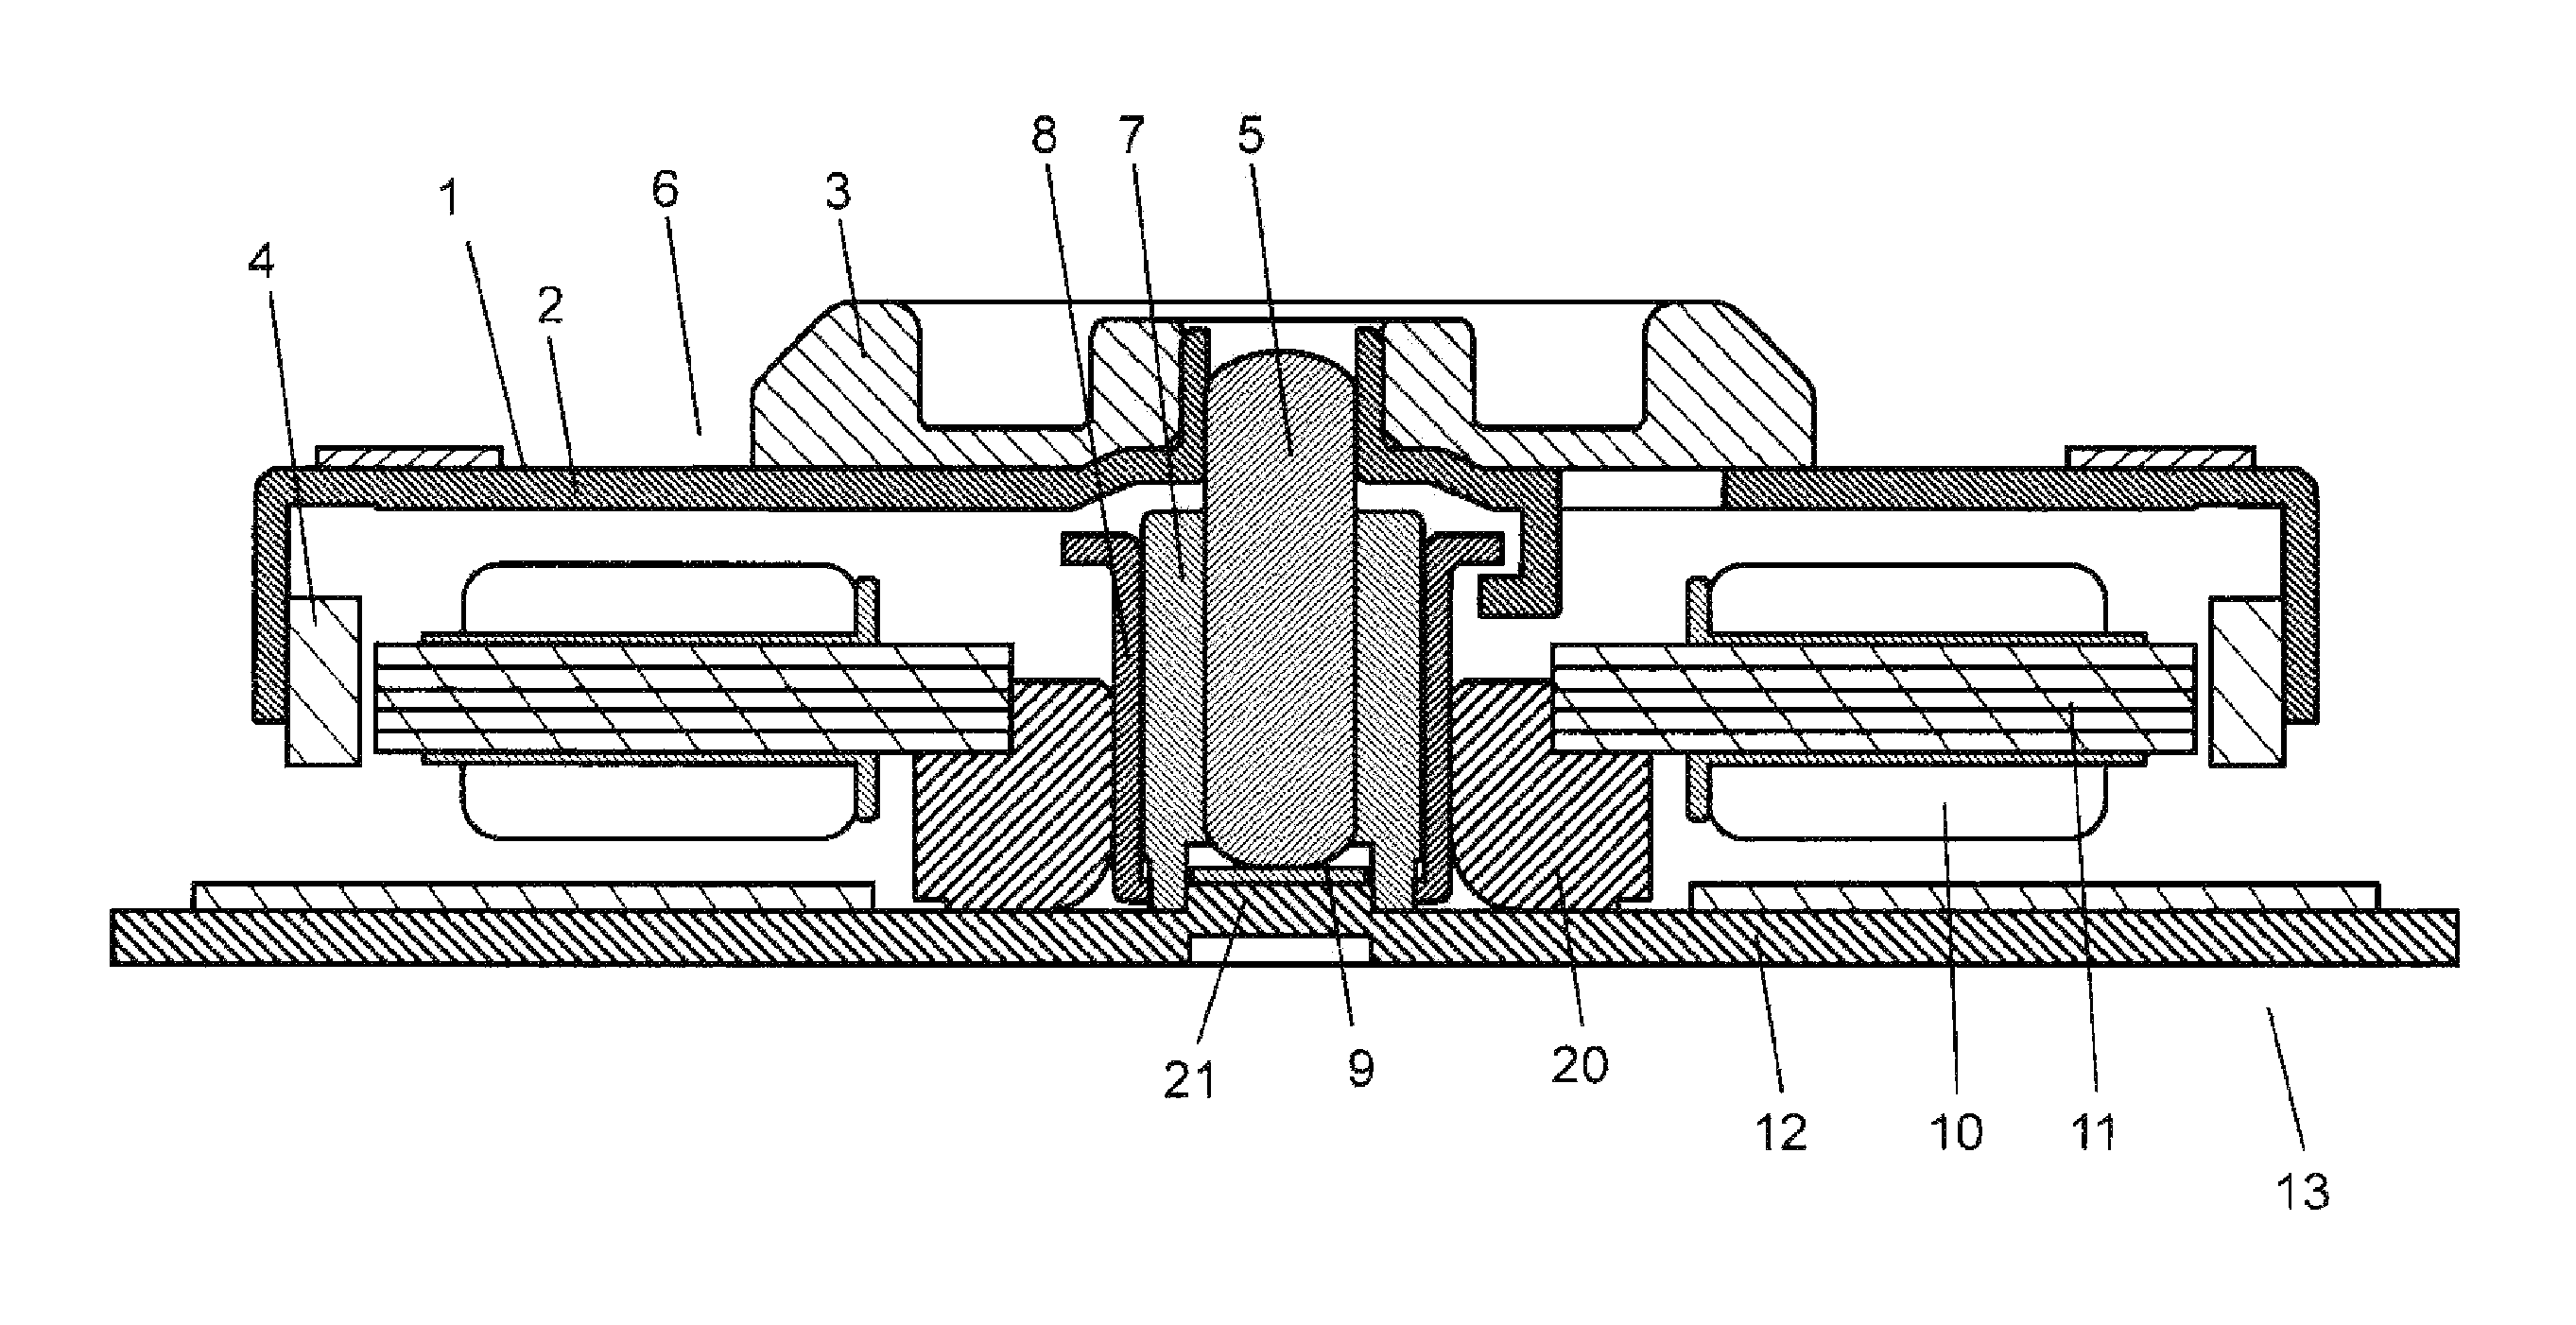 Disk-rotating motor and disk-driving device